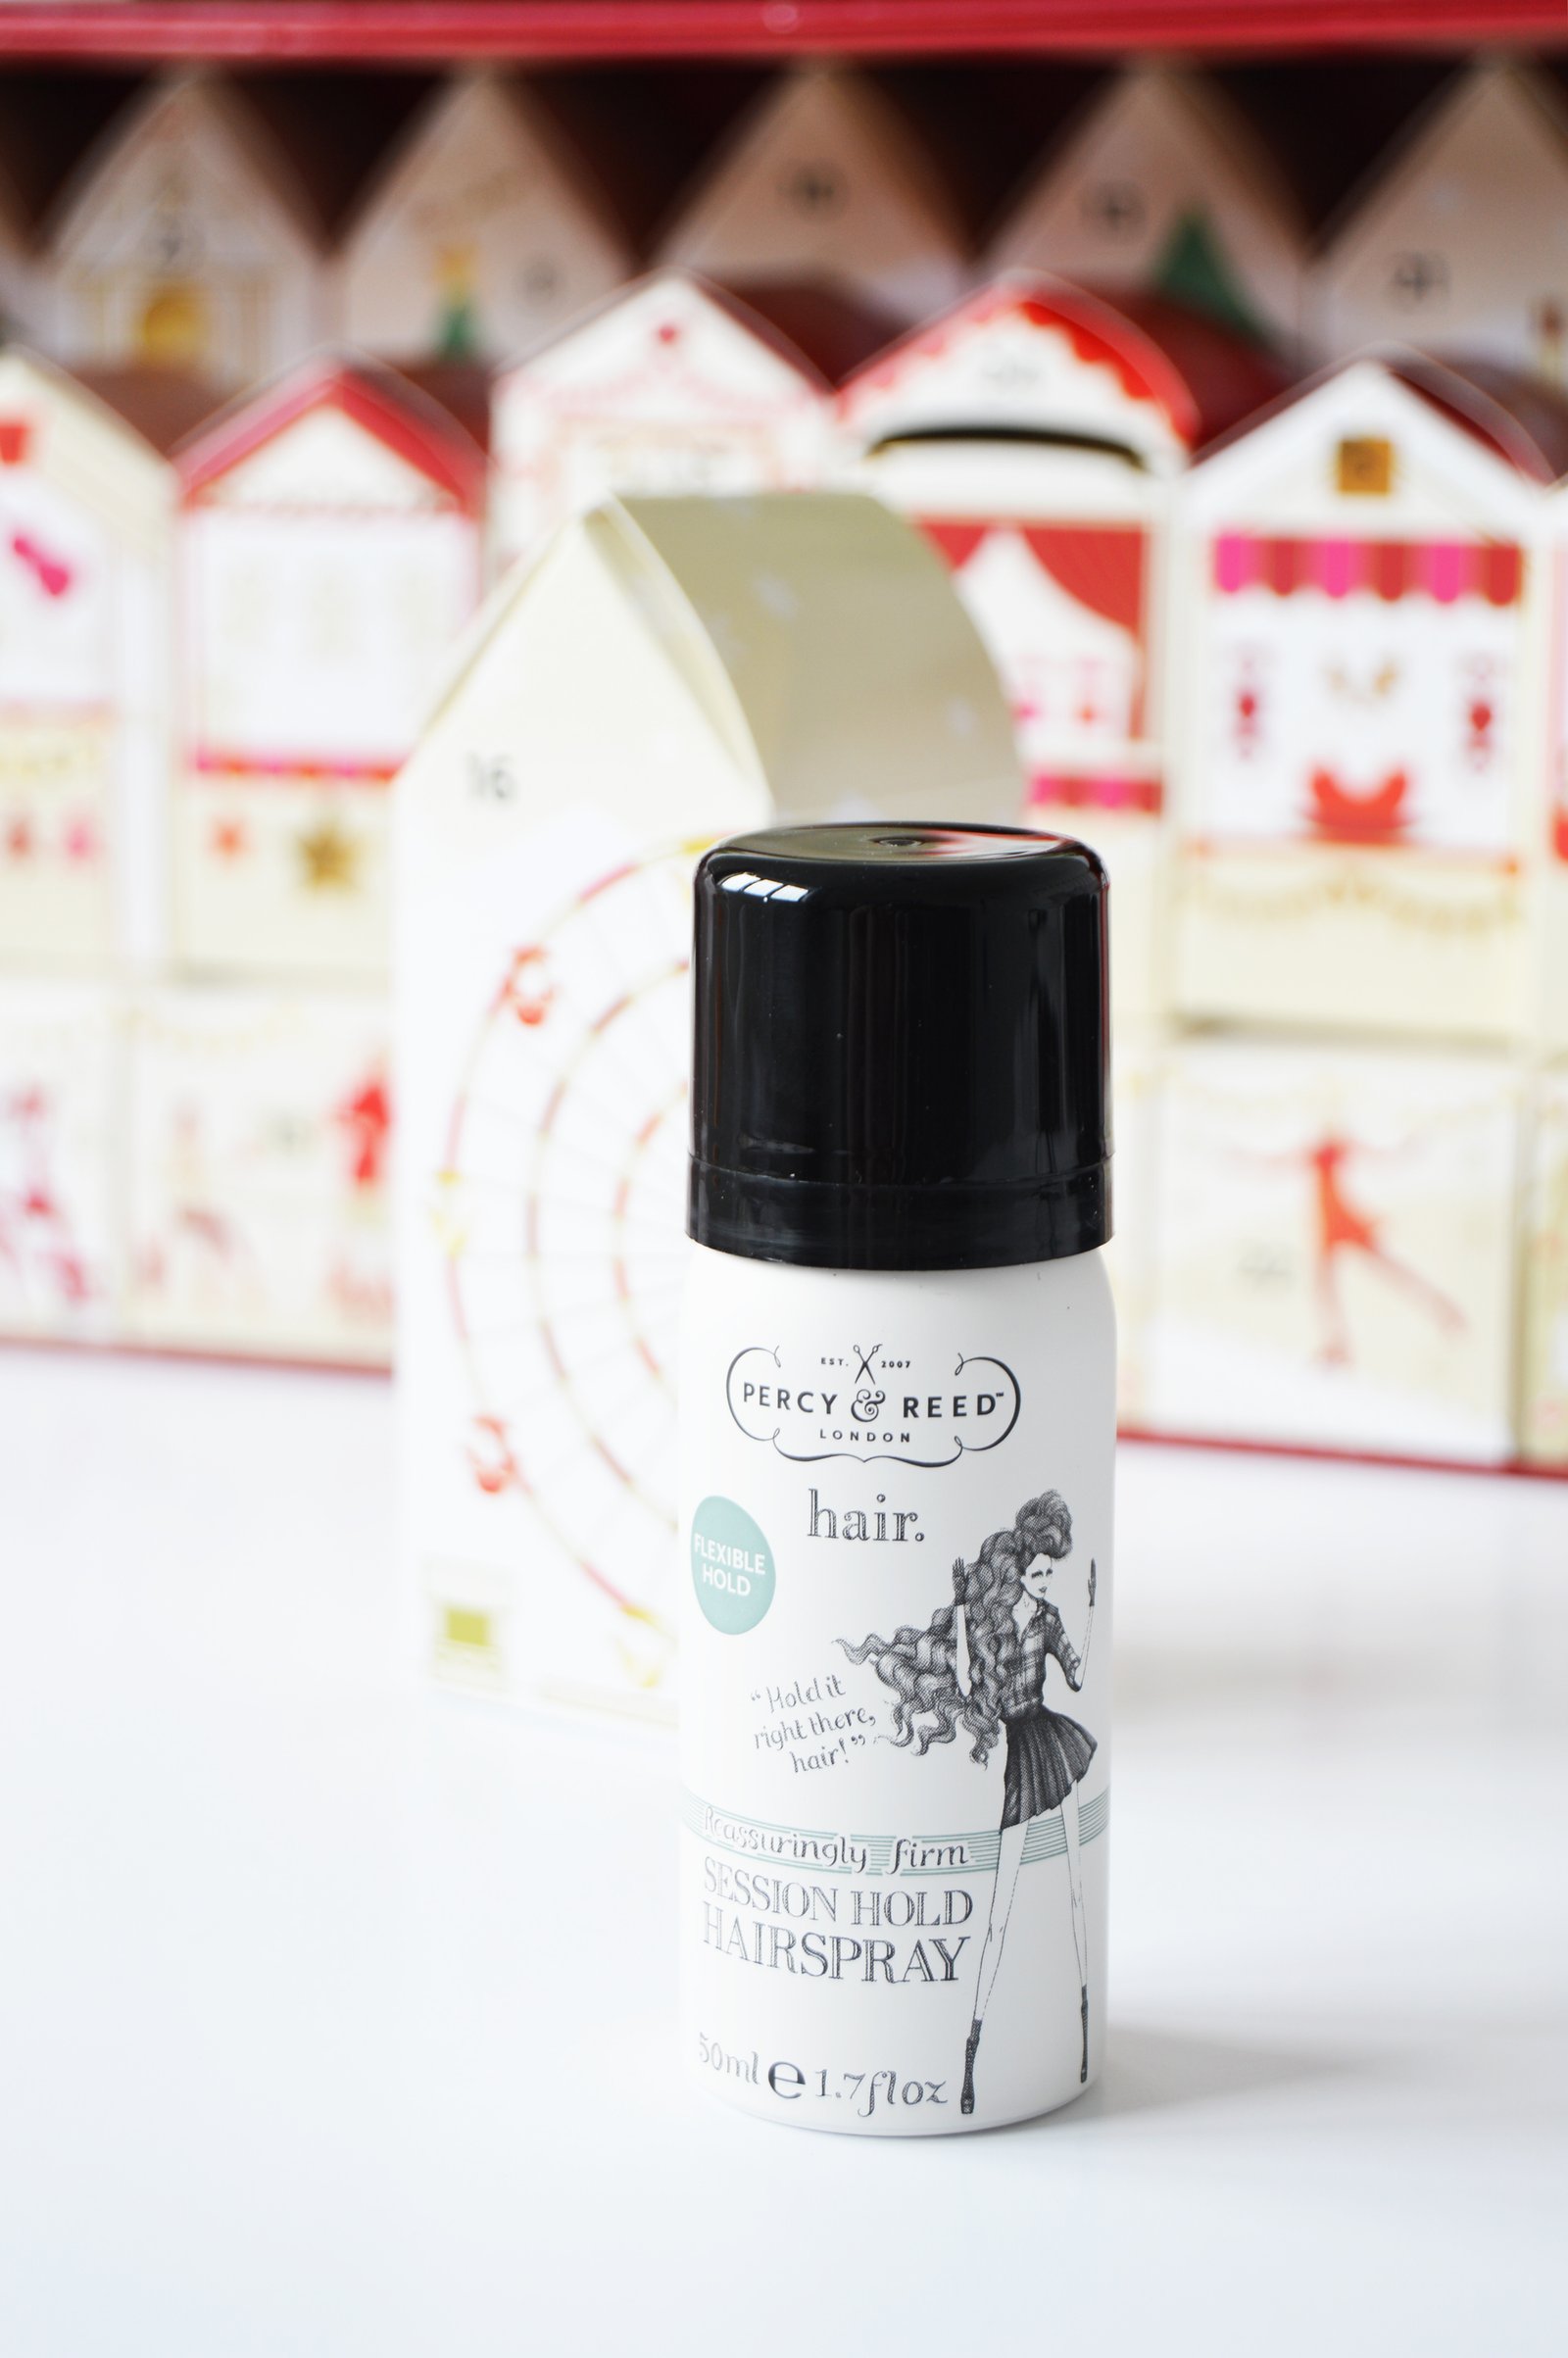 Percy&Reed Reassuringly Firm Session Hold Hair Spray - M&S Advent Calendar